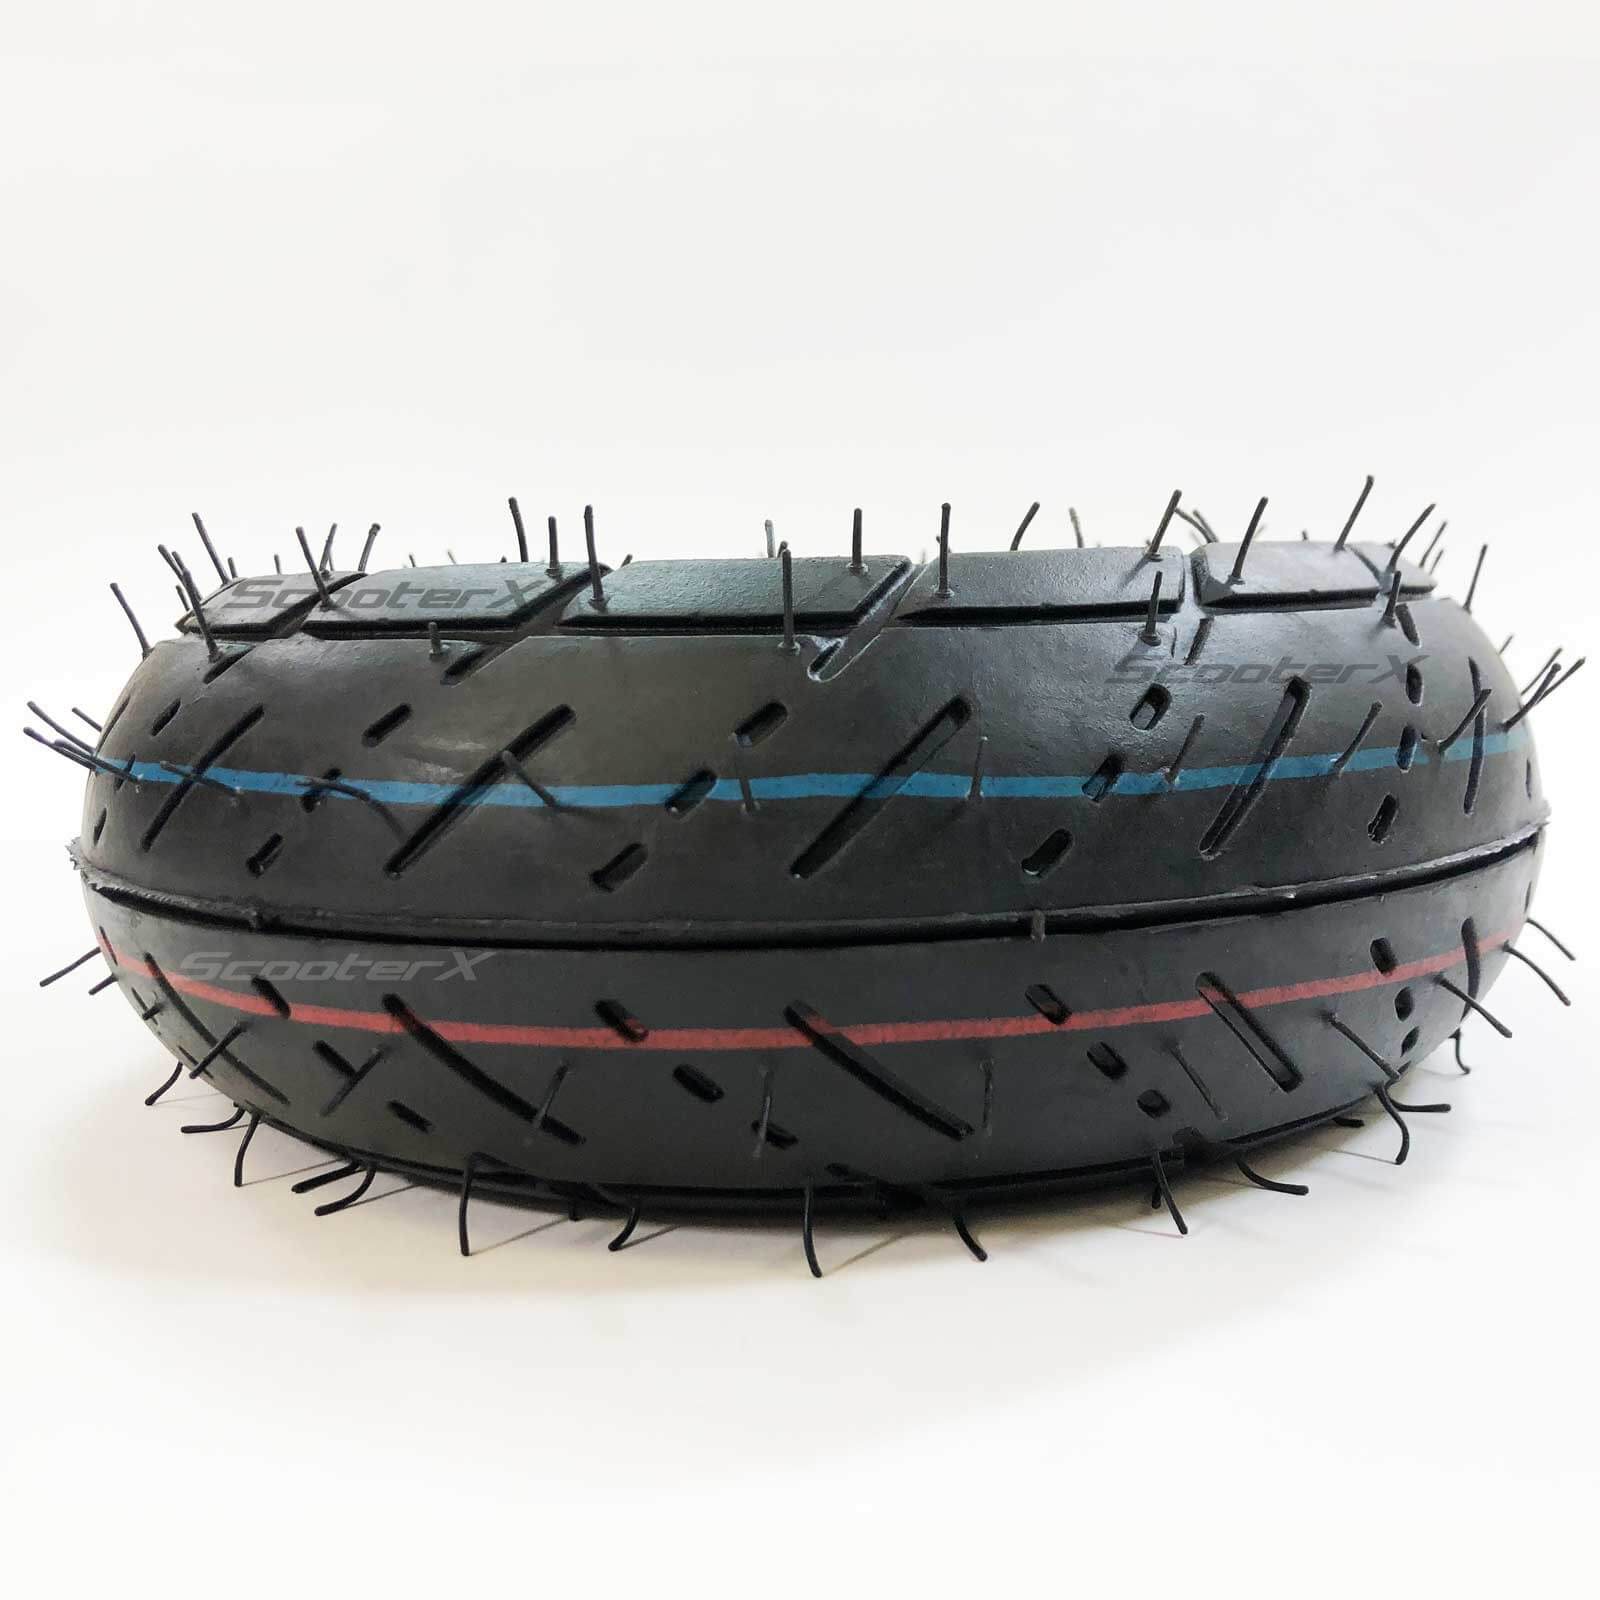 ScooterX 3.50 X 4 STREET TREAD TIRE For Gas/Electric Scooters